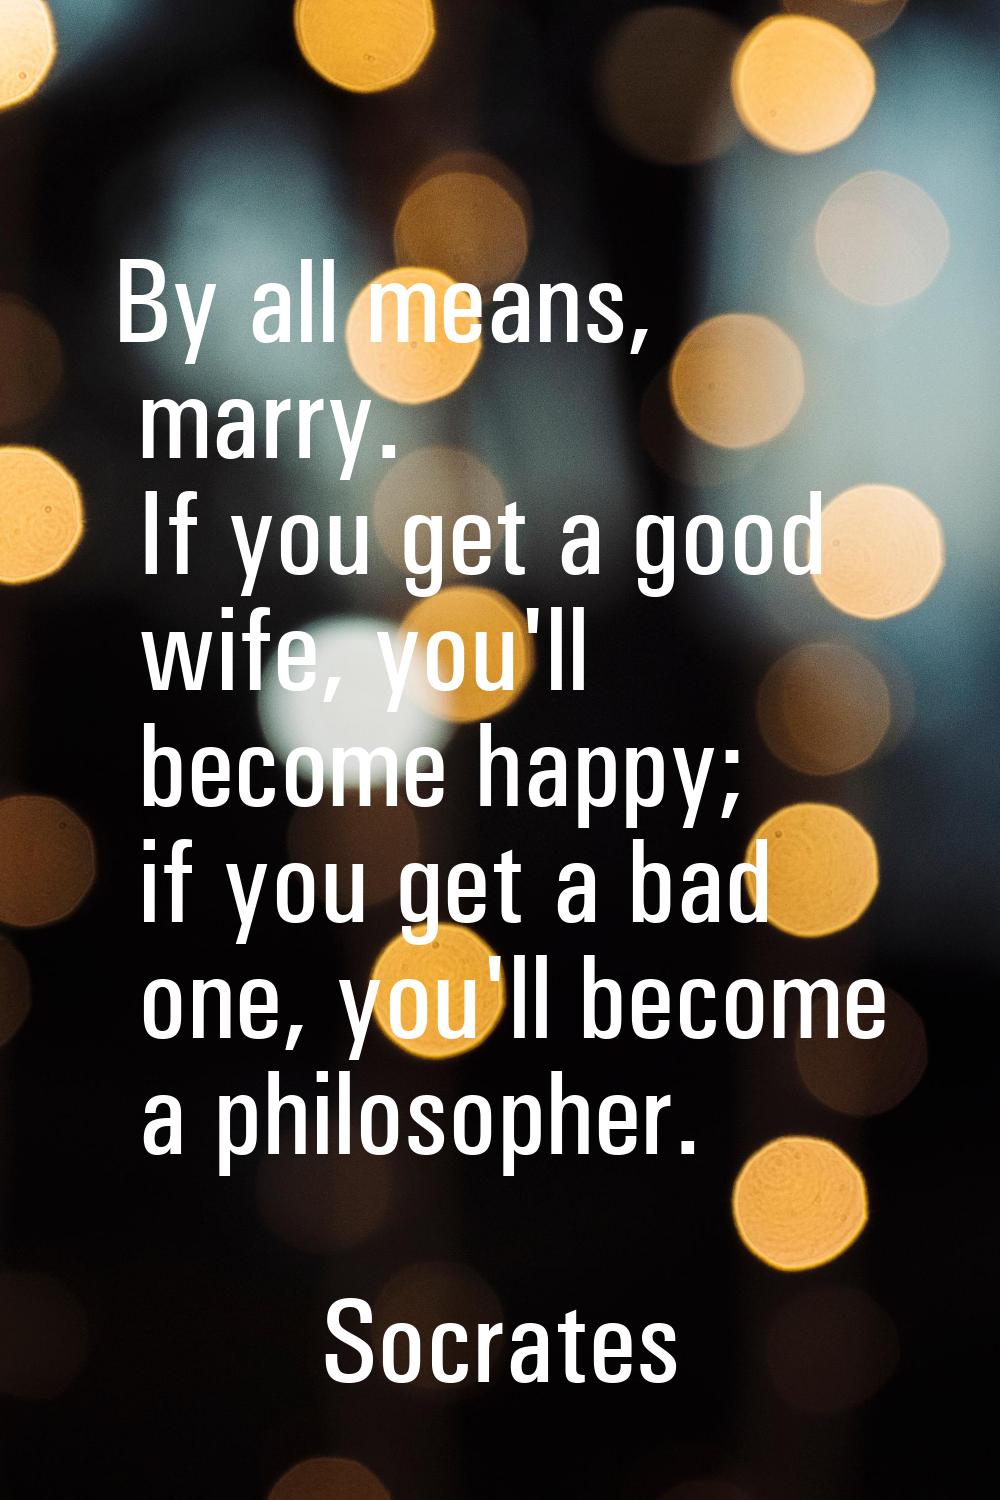 By all means, marry. If you get a good wife, you'll become happy; if you get a bad one, you'll beco